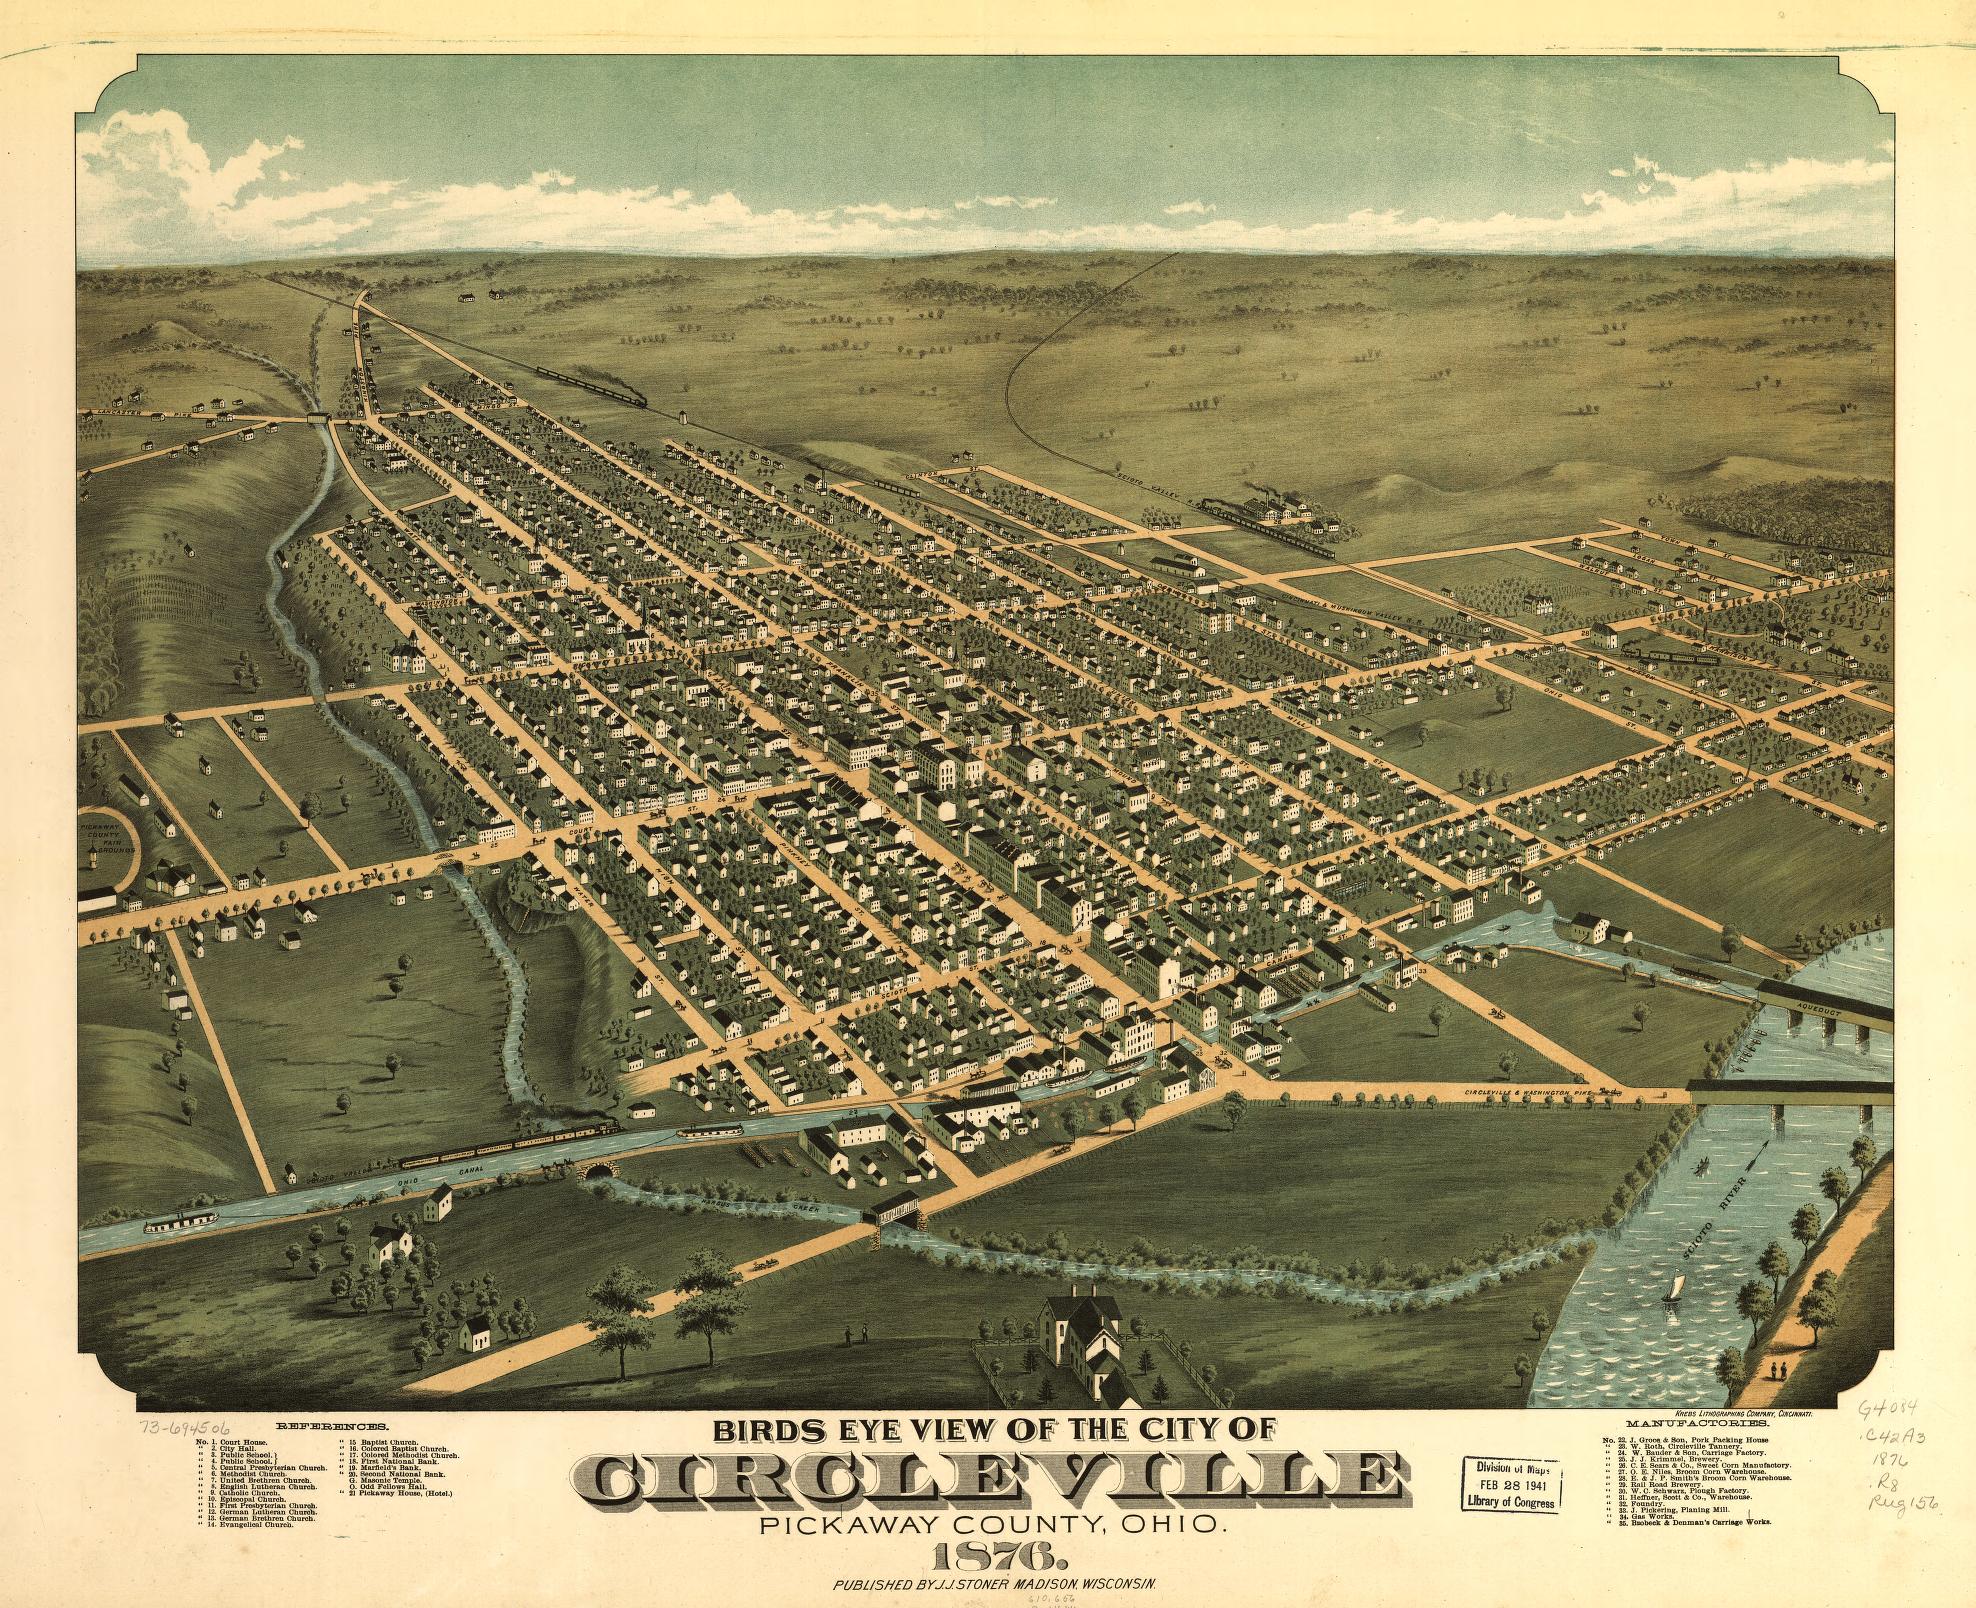 Historical bird's-eye view map of the city of circleville, pickaway county, ohio, from 1876.